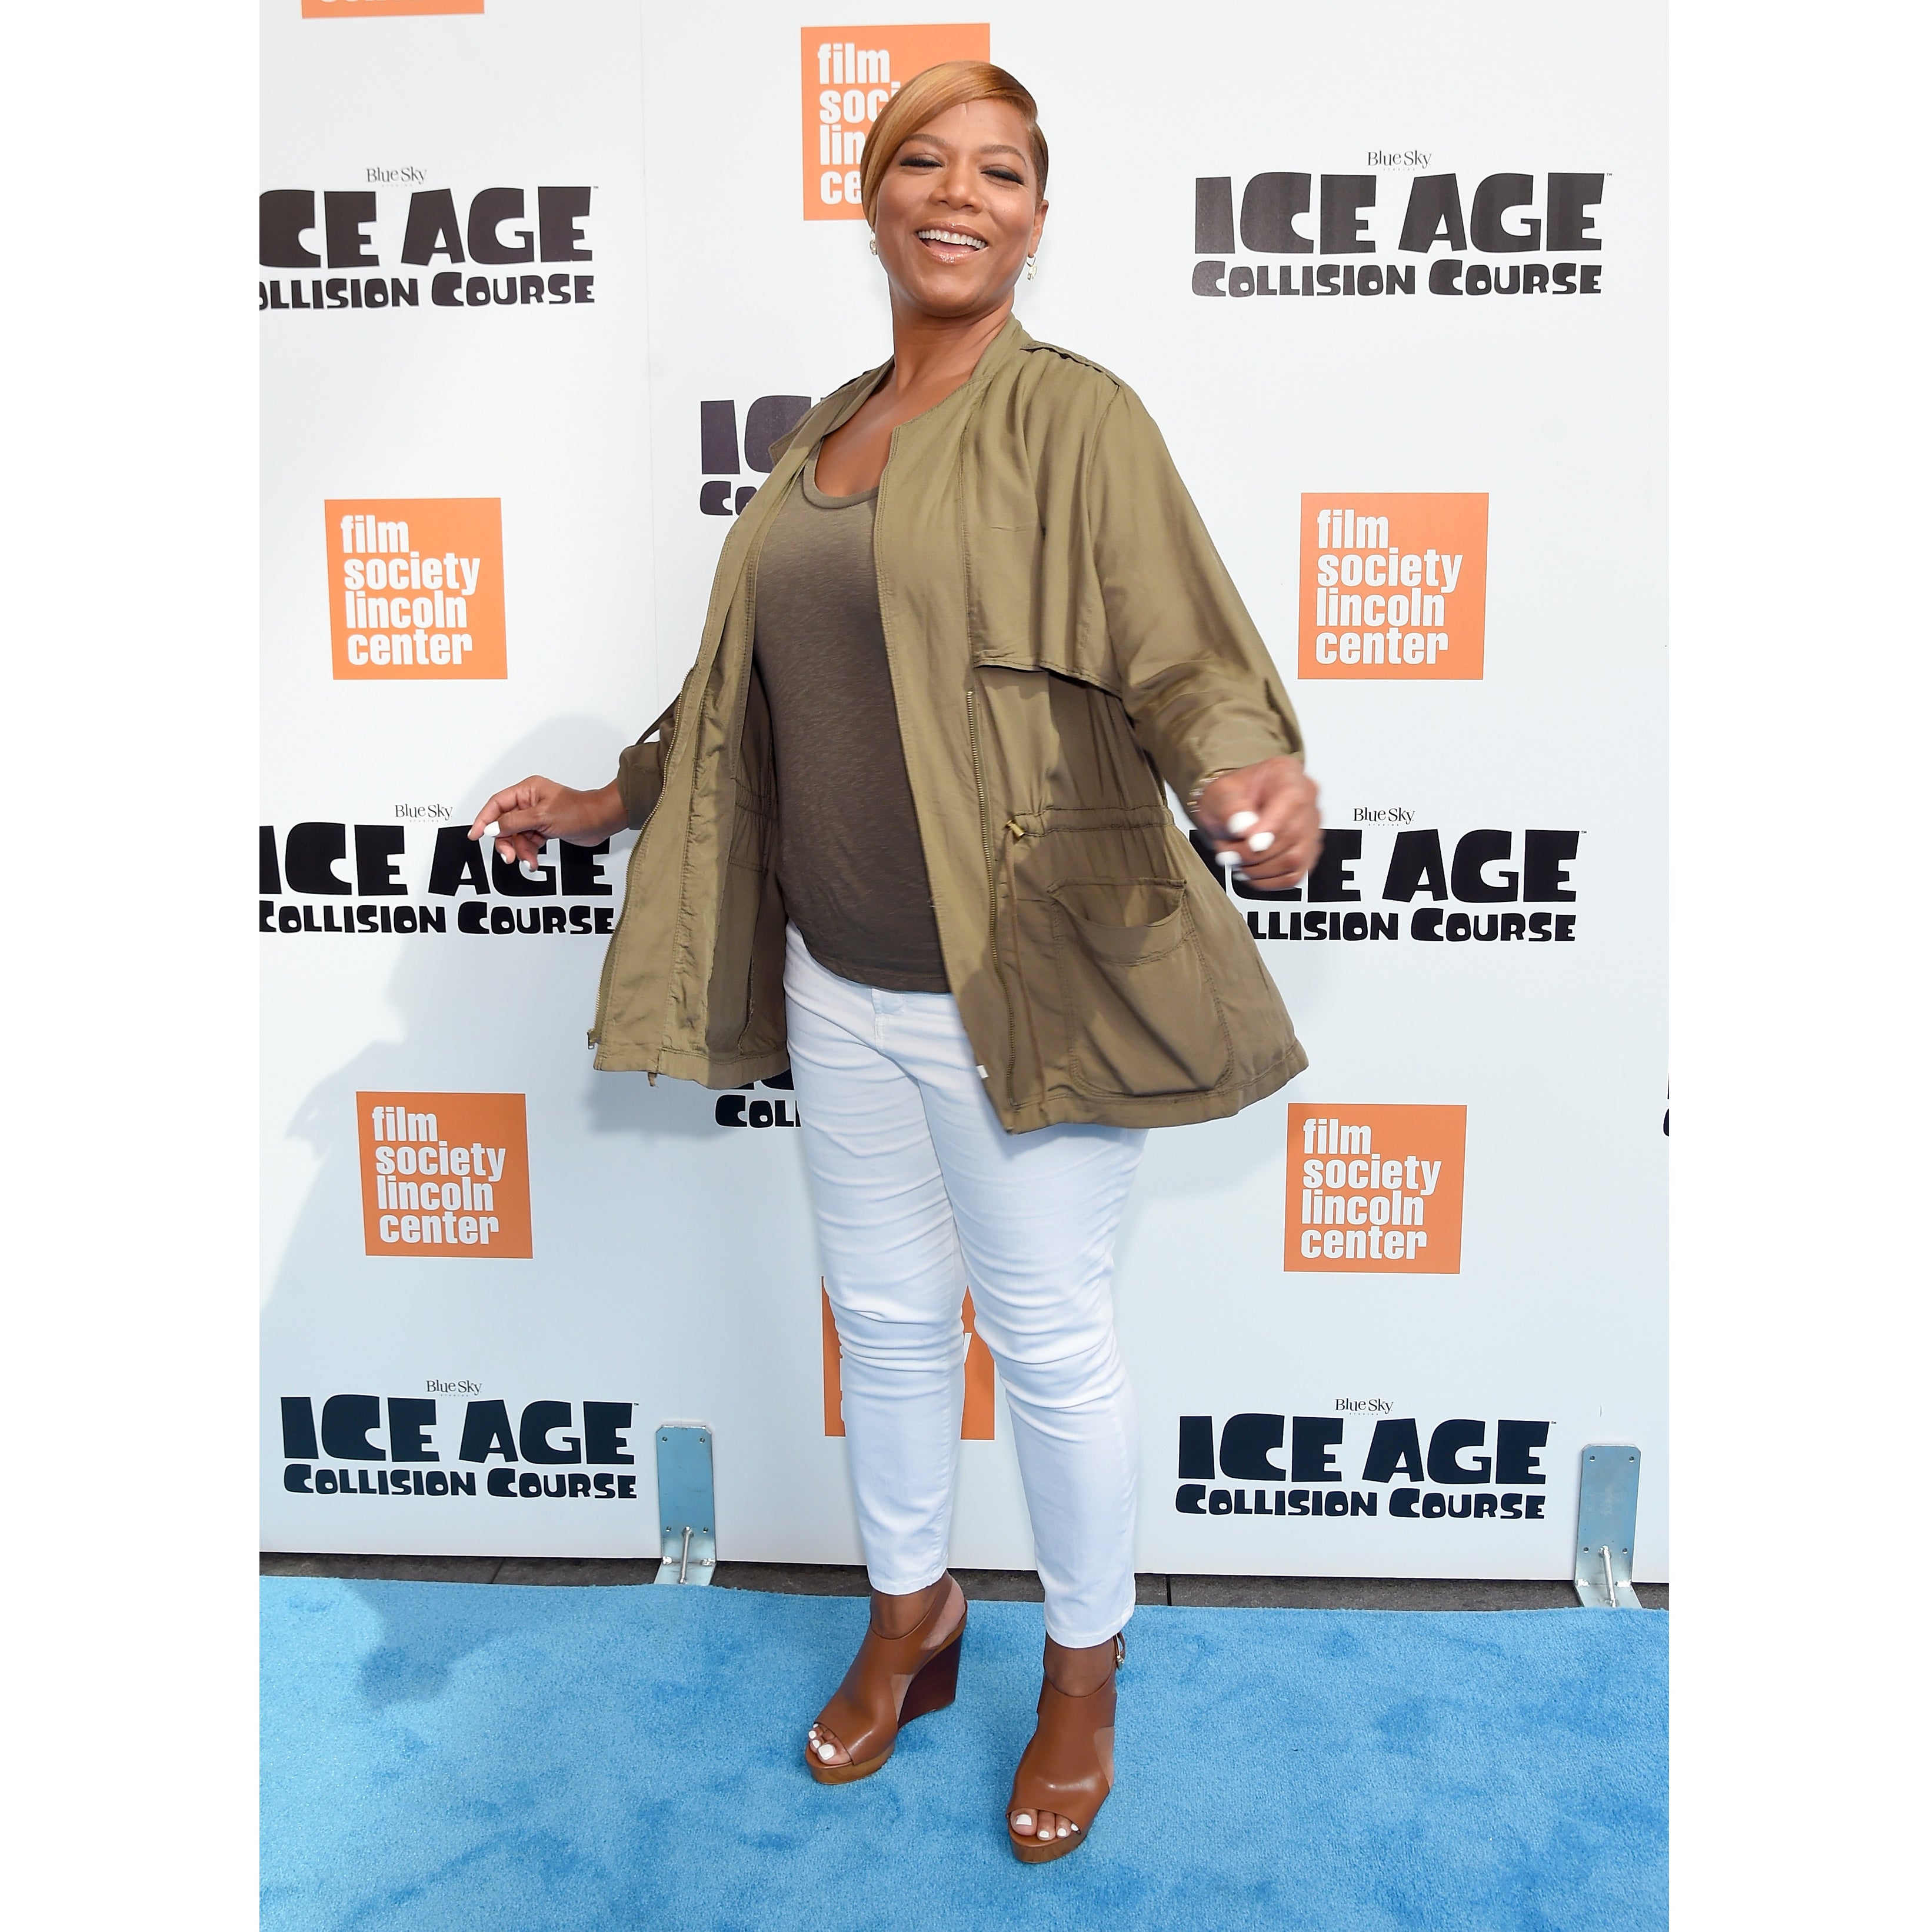 Gabrielle Union, Queen Latifah, Maxwell and More!
